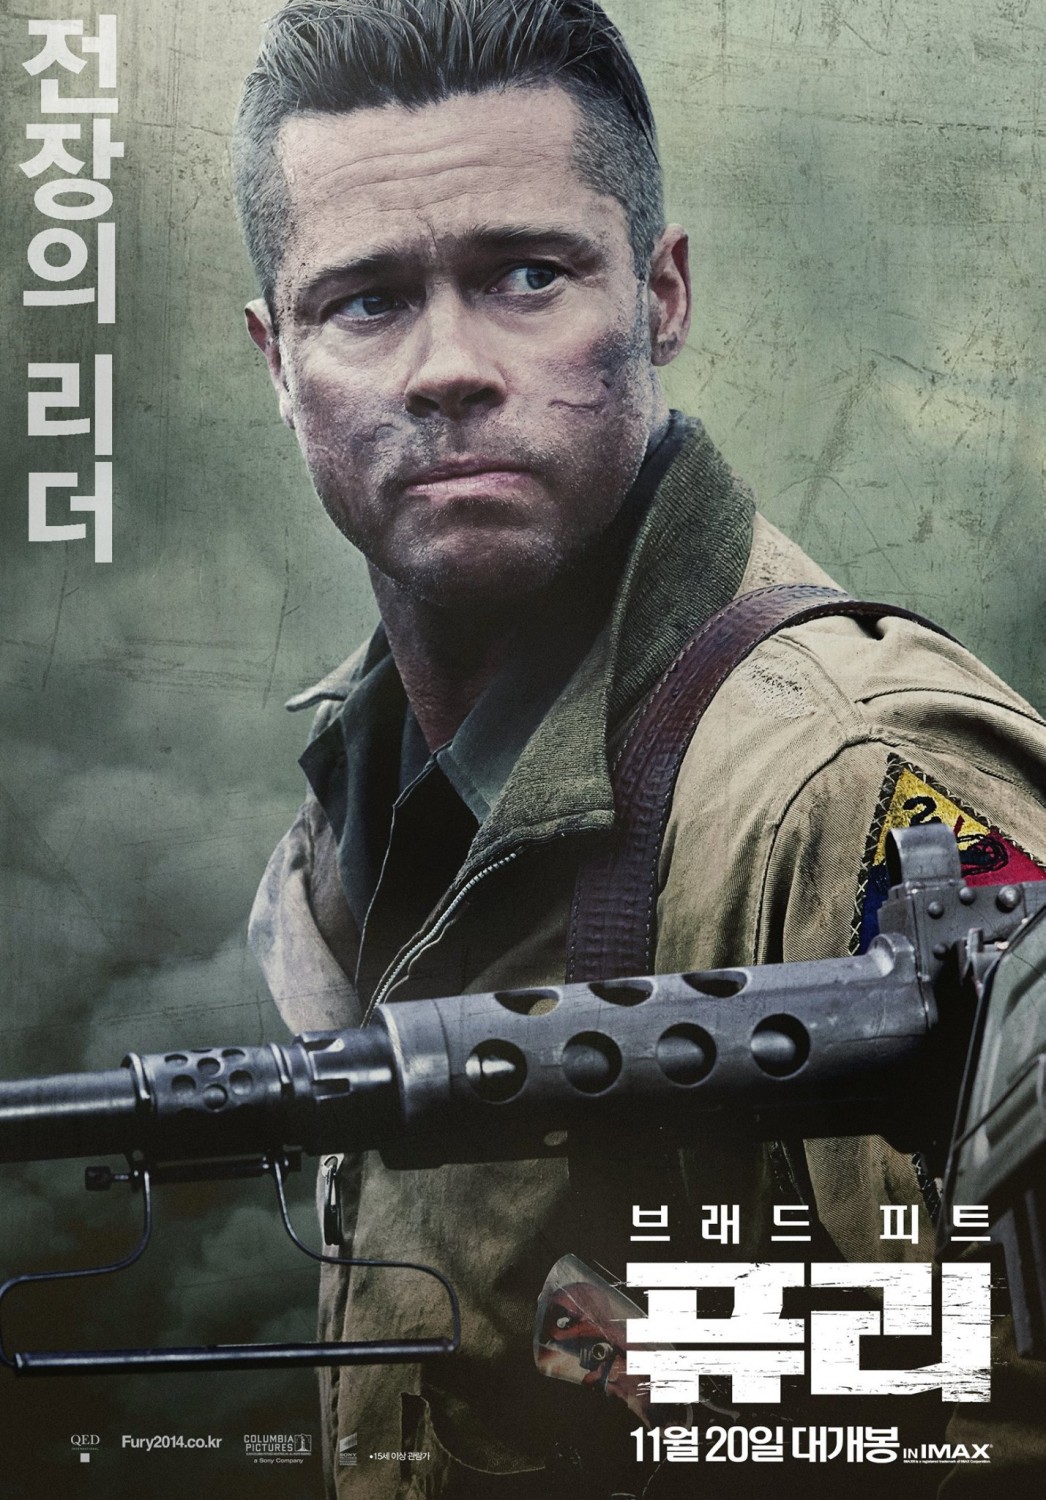 Extra Large Movie Poster Image for Fury